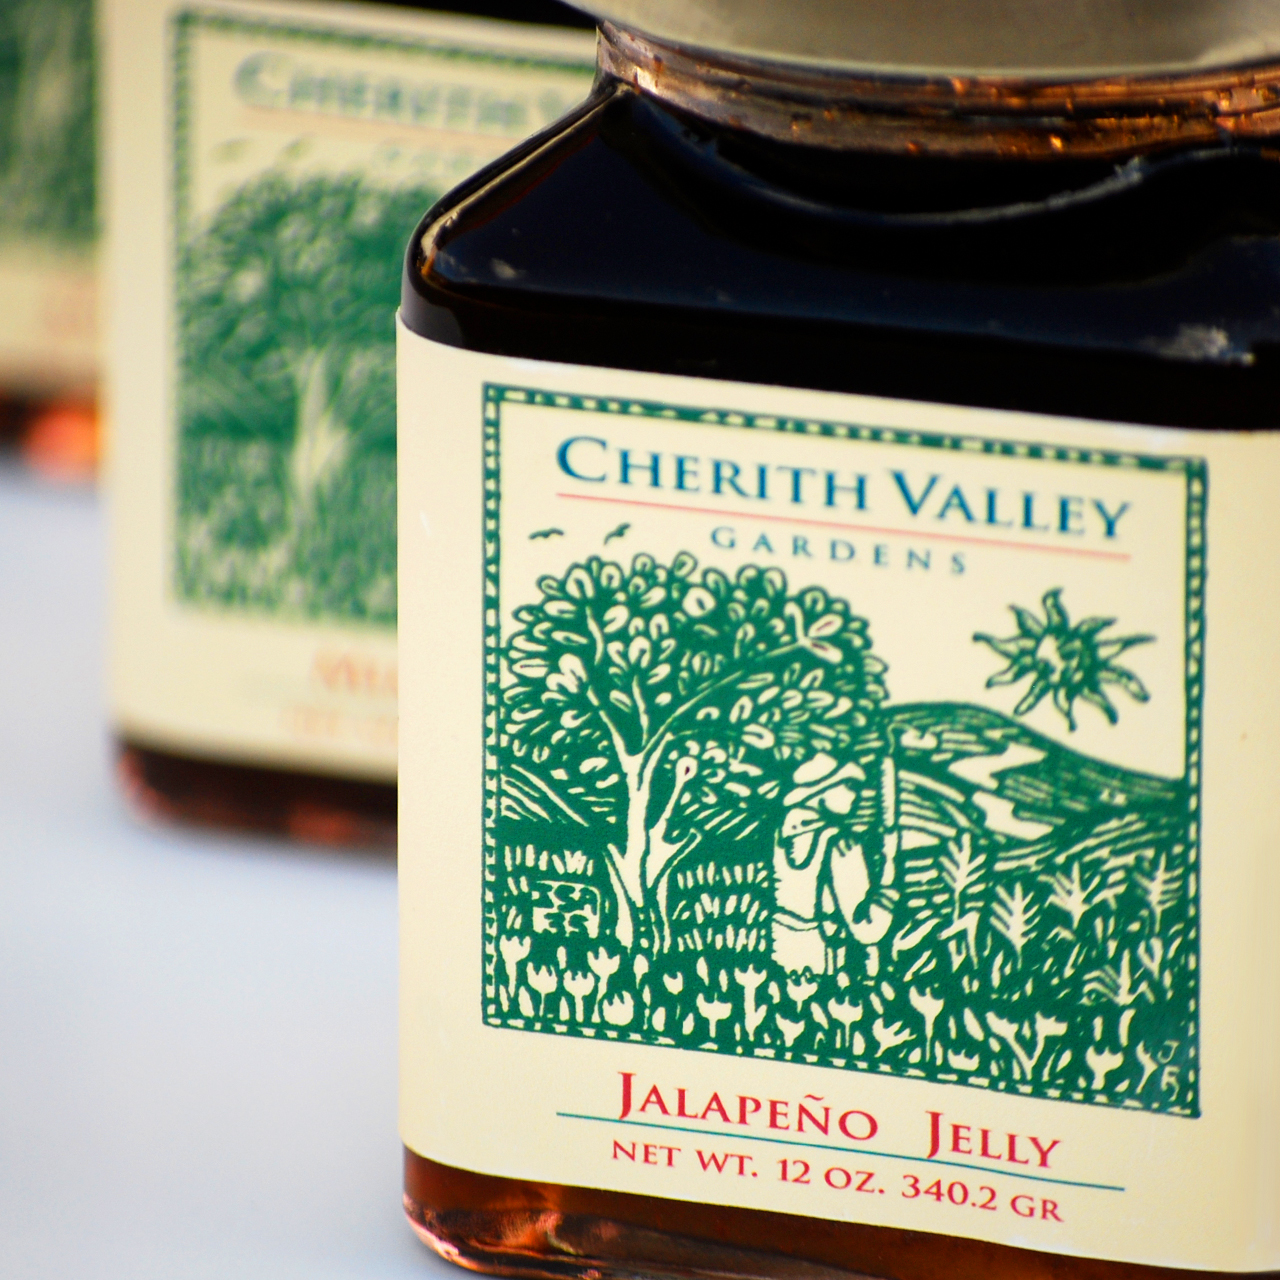 An image of a jar of Cherith Valley Gardens Jalapeño Jelly package design